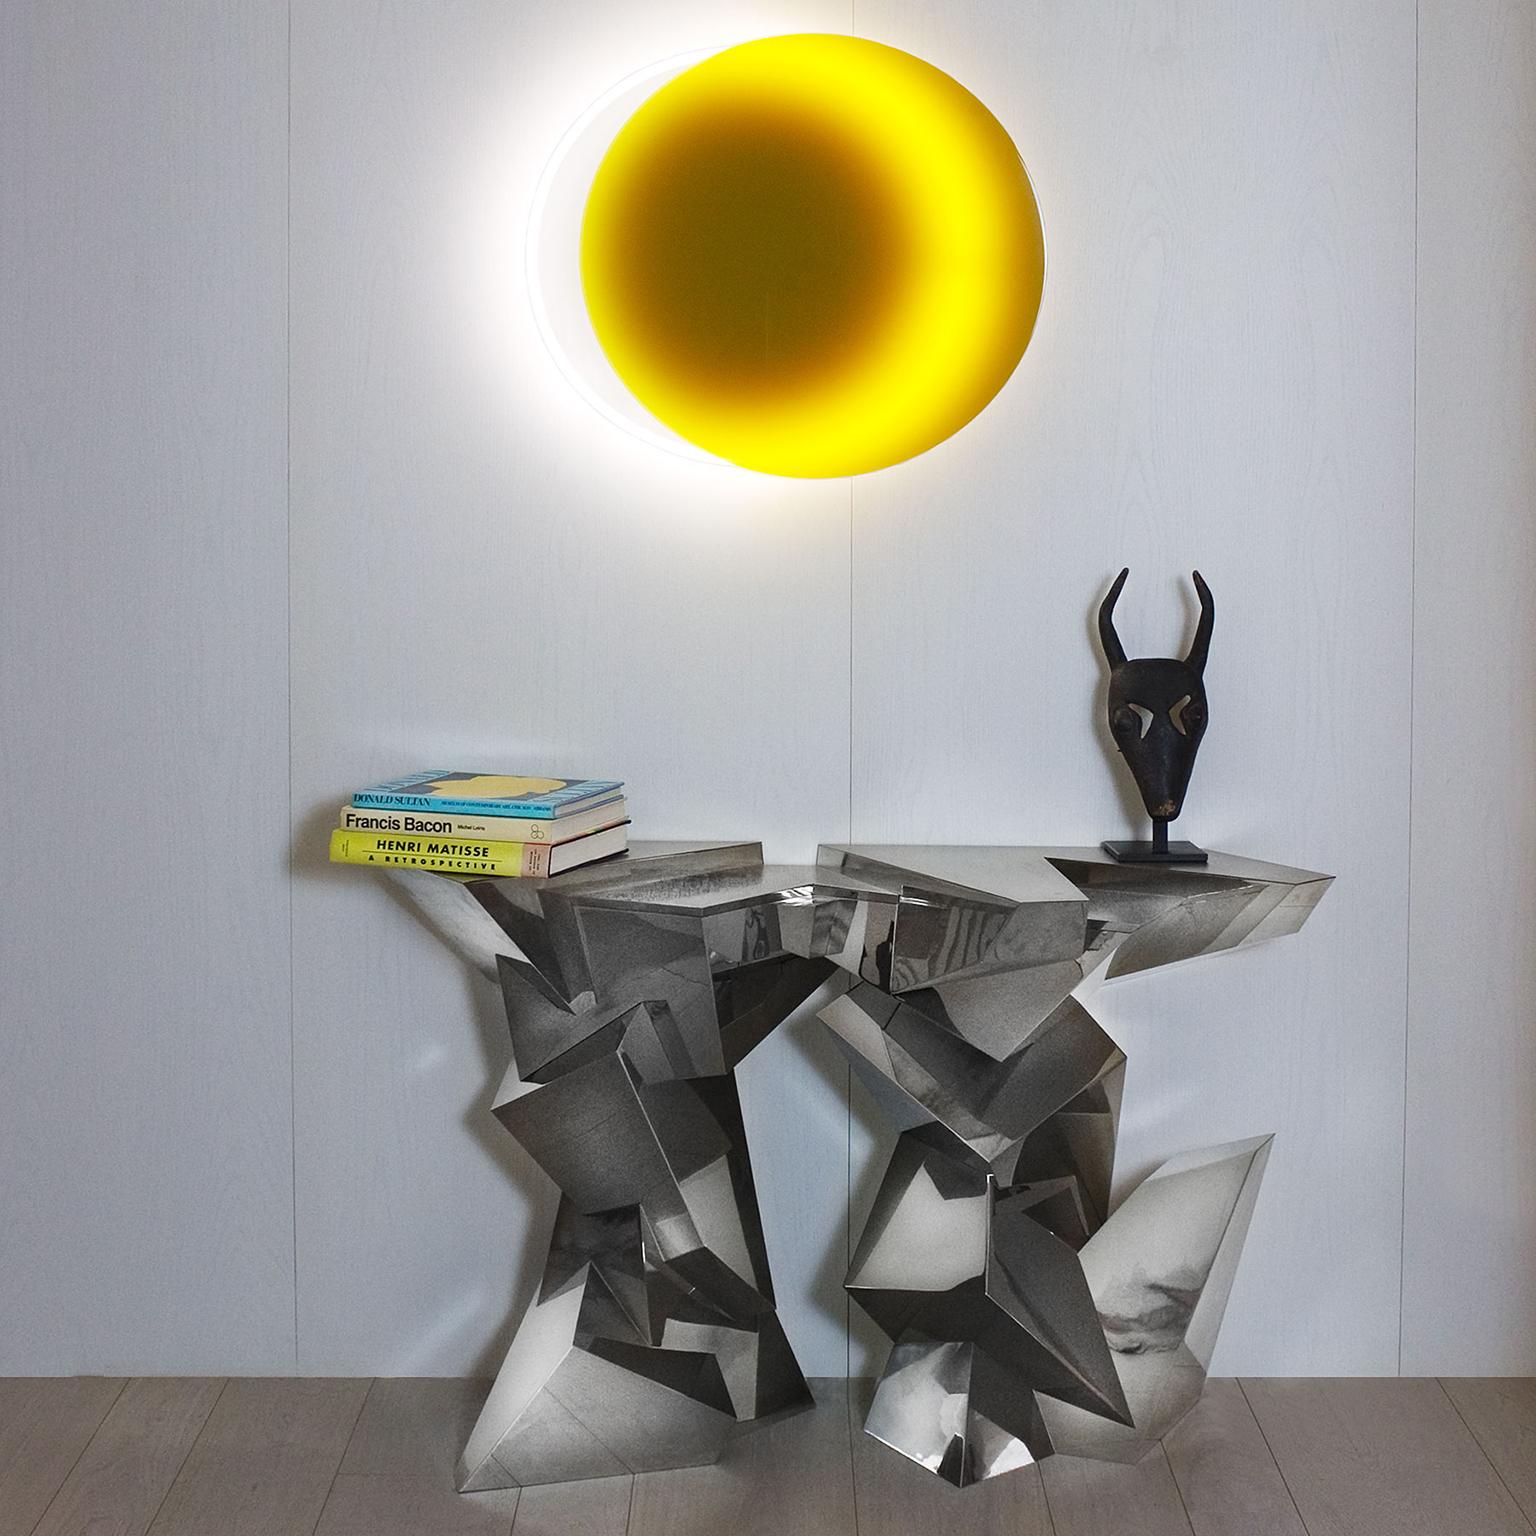 Quartz console designed by Juan and Paloma Garrido for Damian Garrido in 2015
Silver plated brass and later nickel-plated.
 